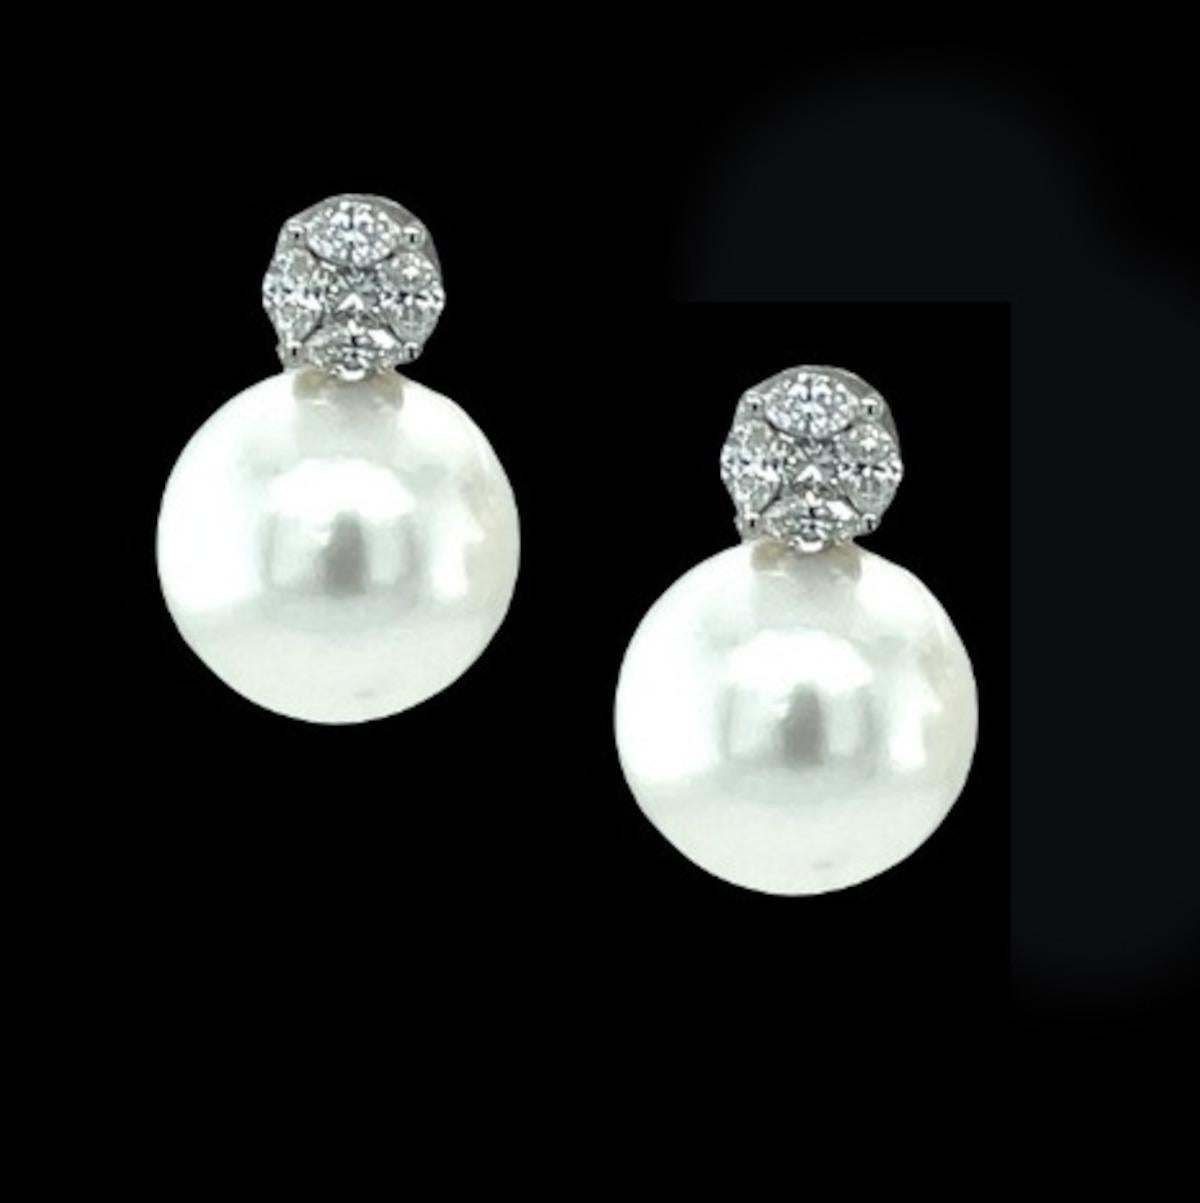 These elegant South Sea pearl and diamond earrings are a timeless classic for any high jewelry collection. The 11.50mm South Sea pearls are stunning - perfectly round and blemish-free, with gorgeous luster! We have paired these gems with diamond